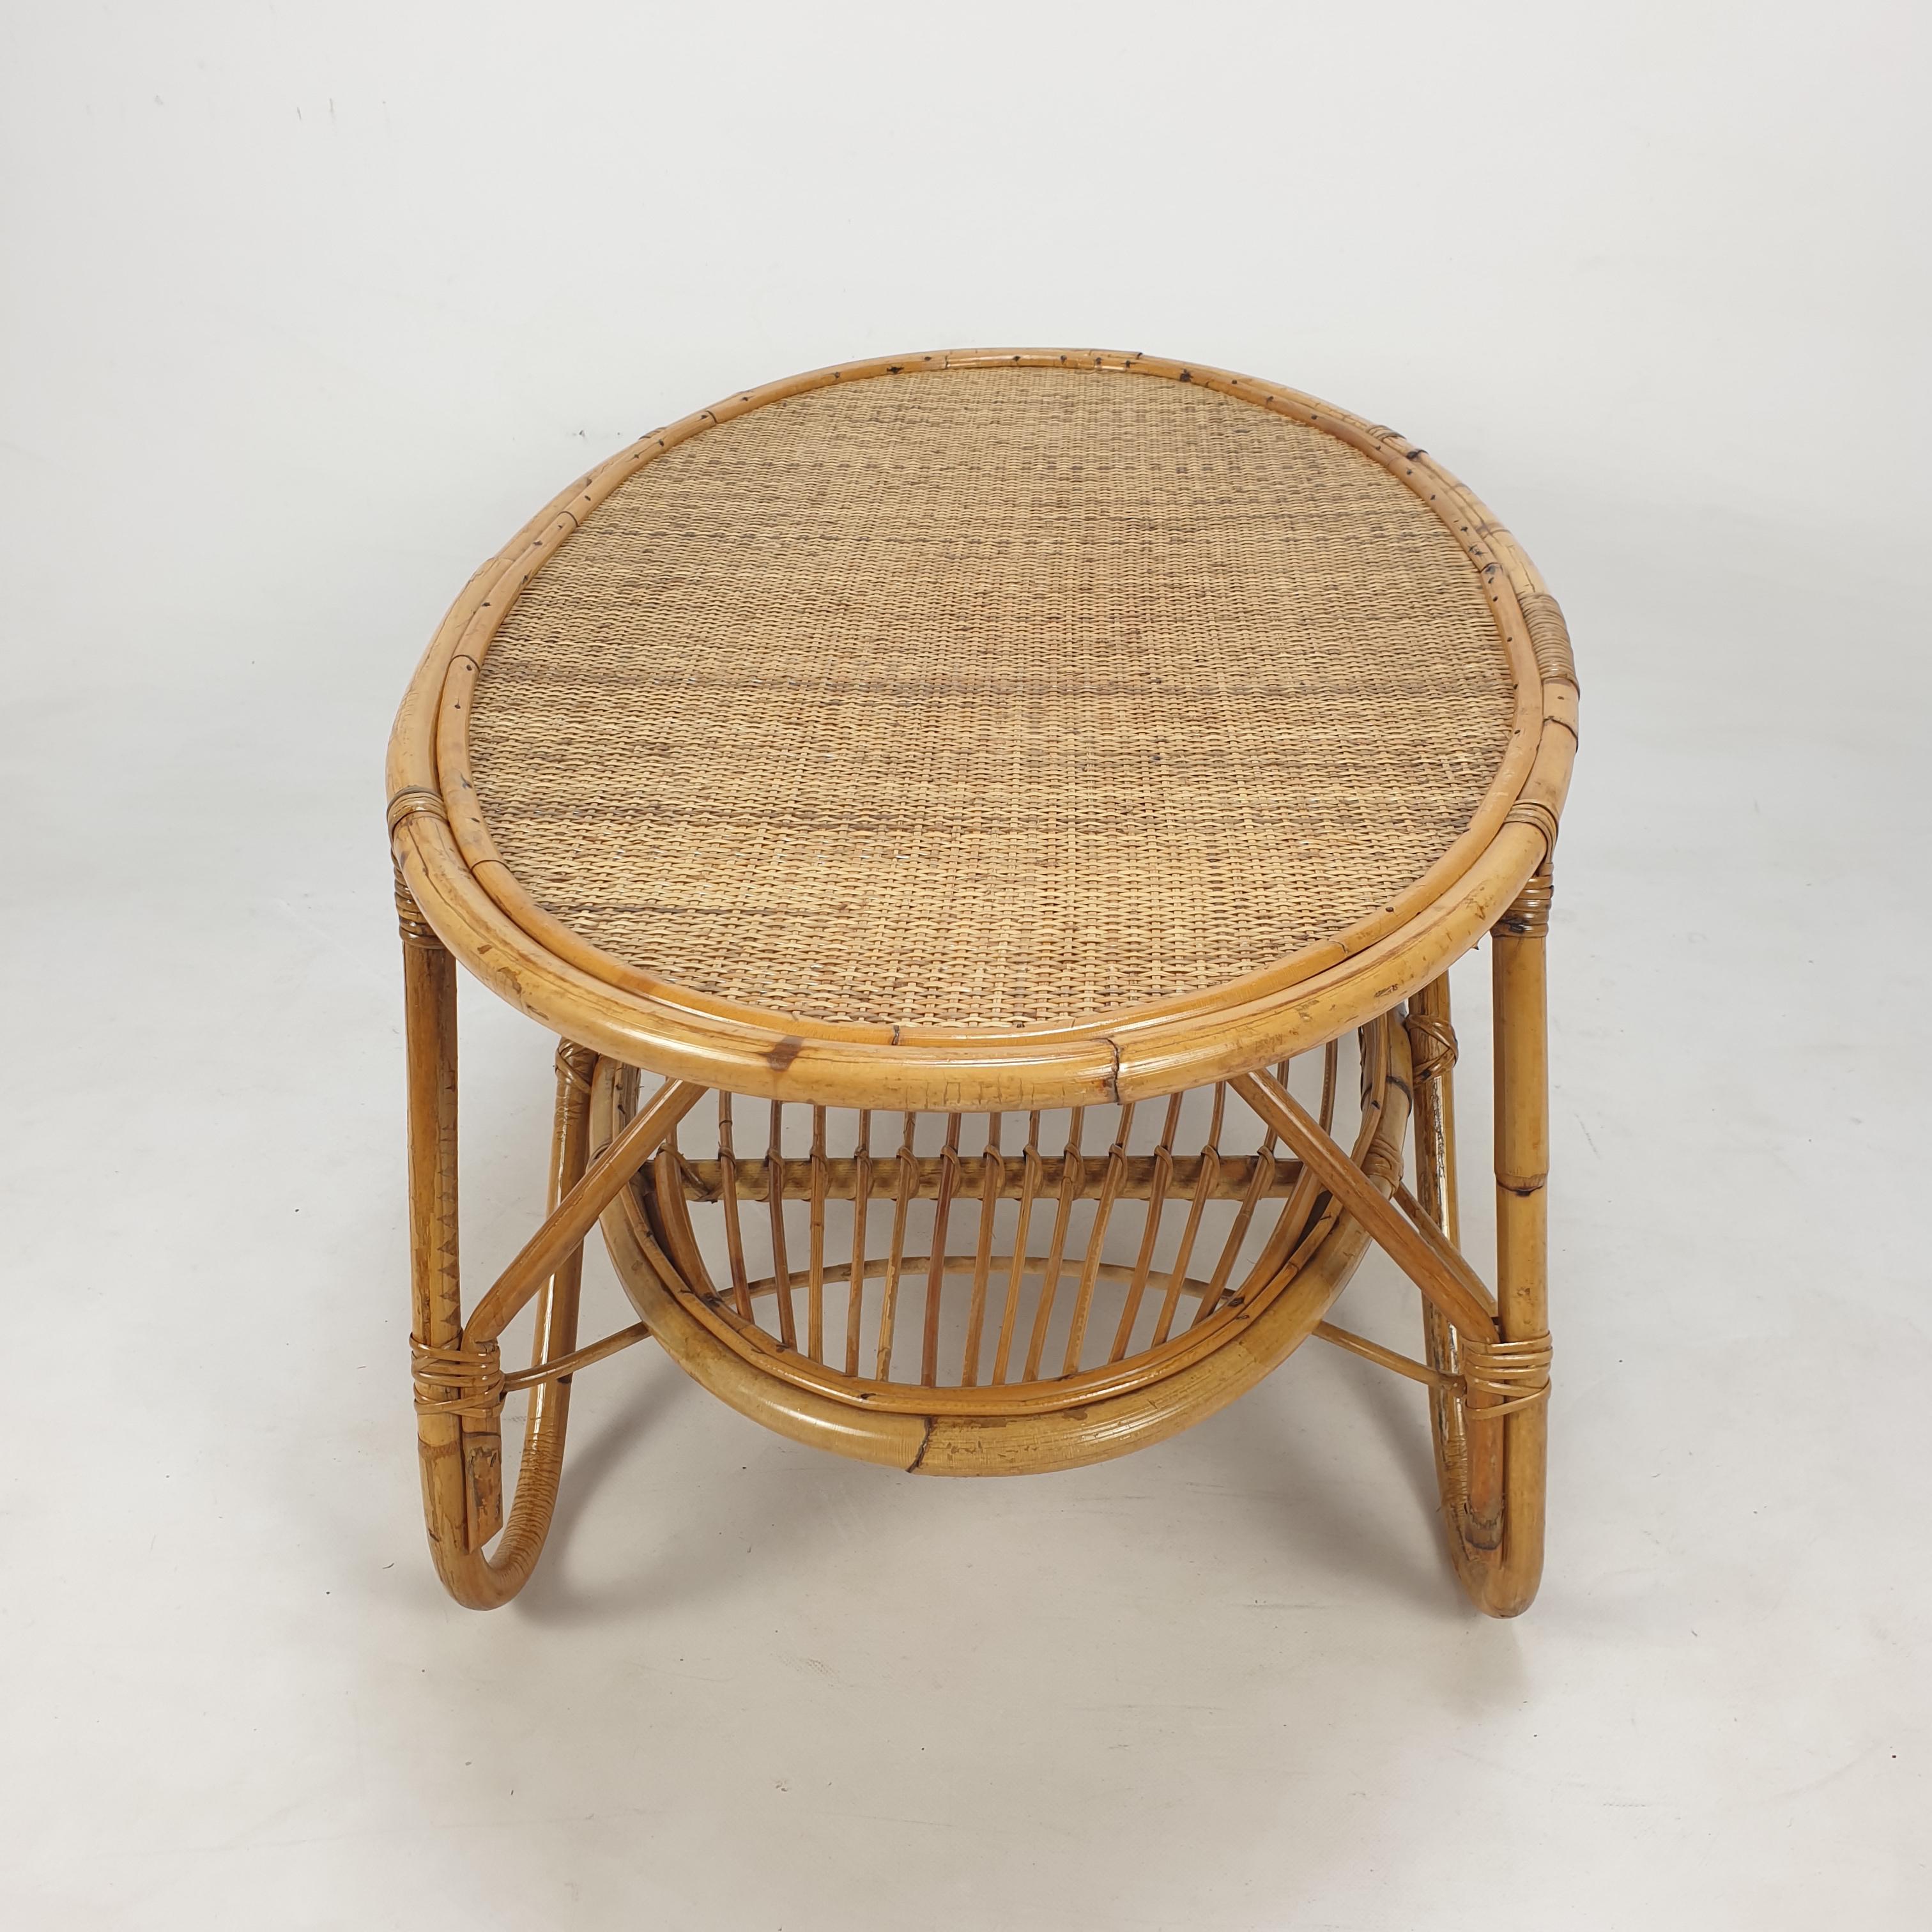 Italian Wicker and Rattan Coffee Table, 1960s For Sale 6